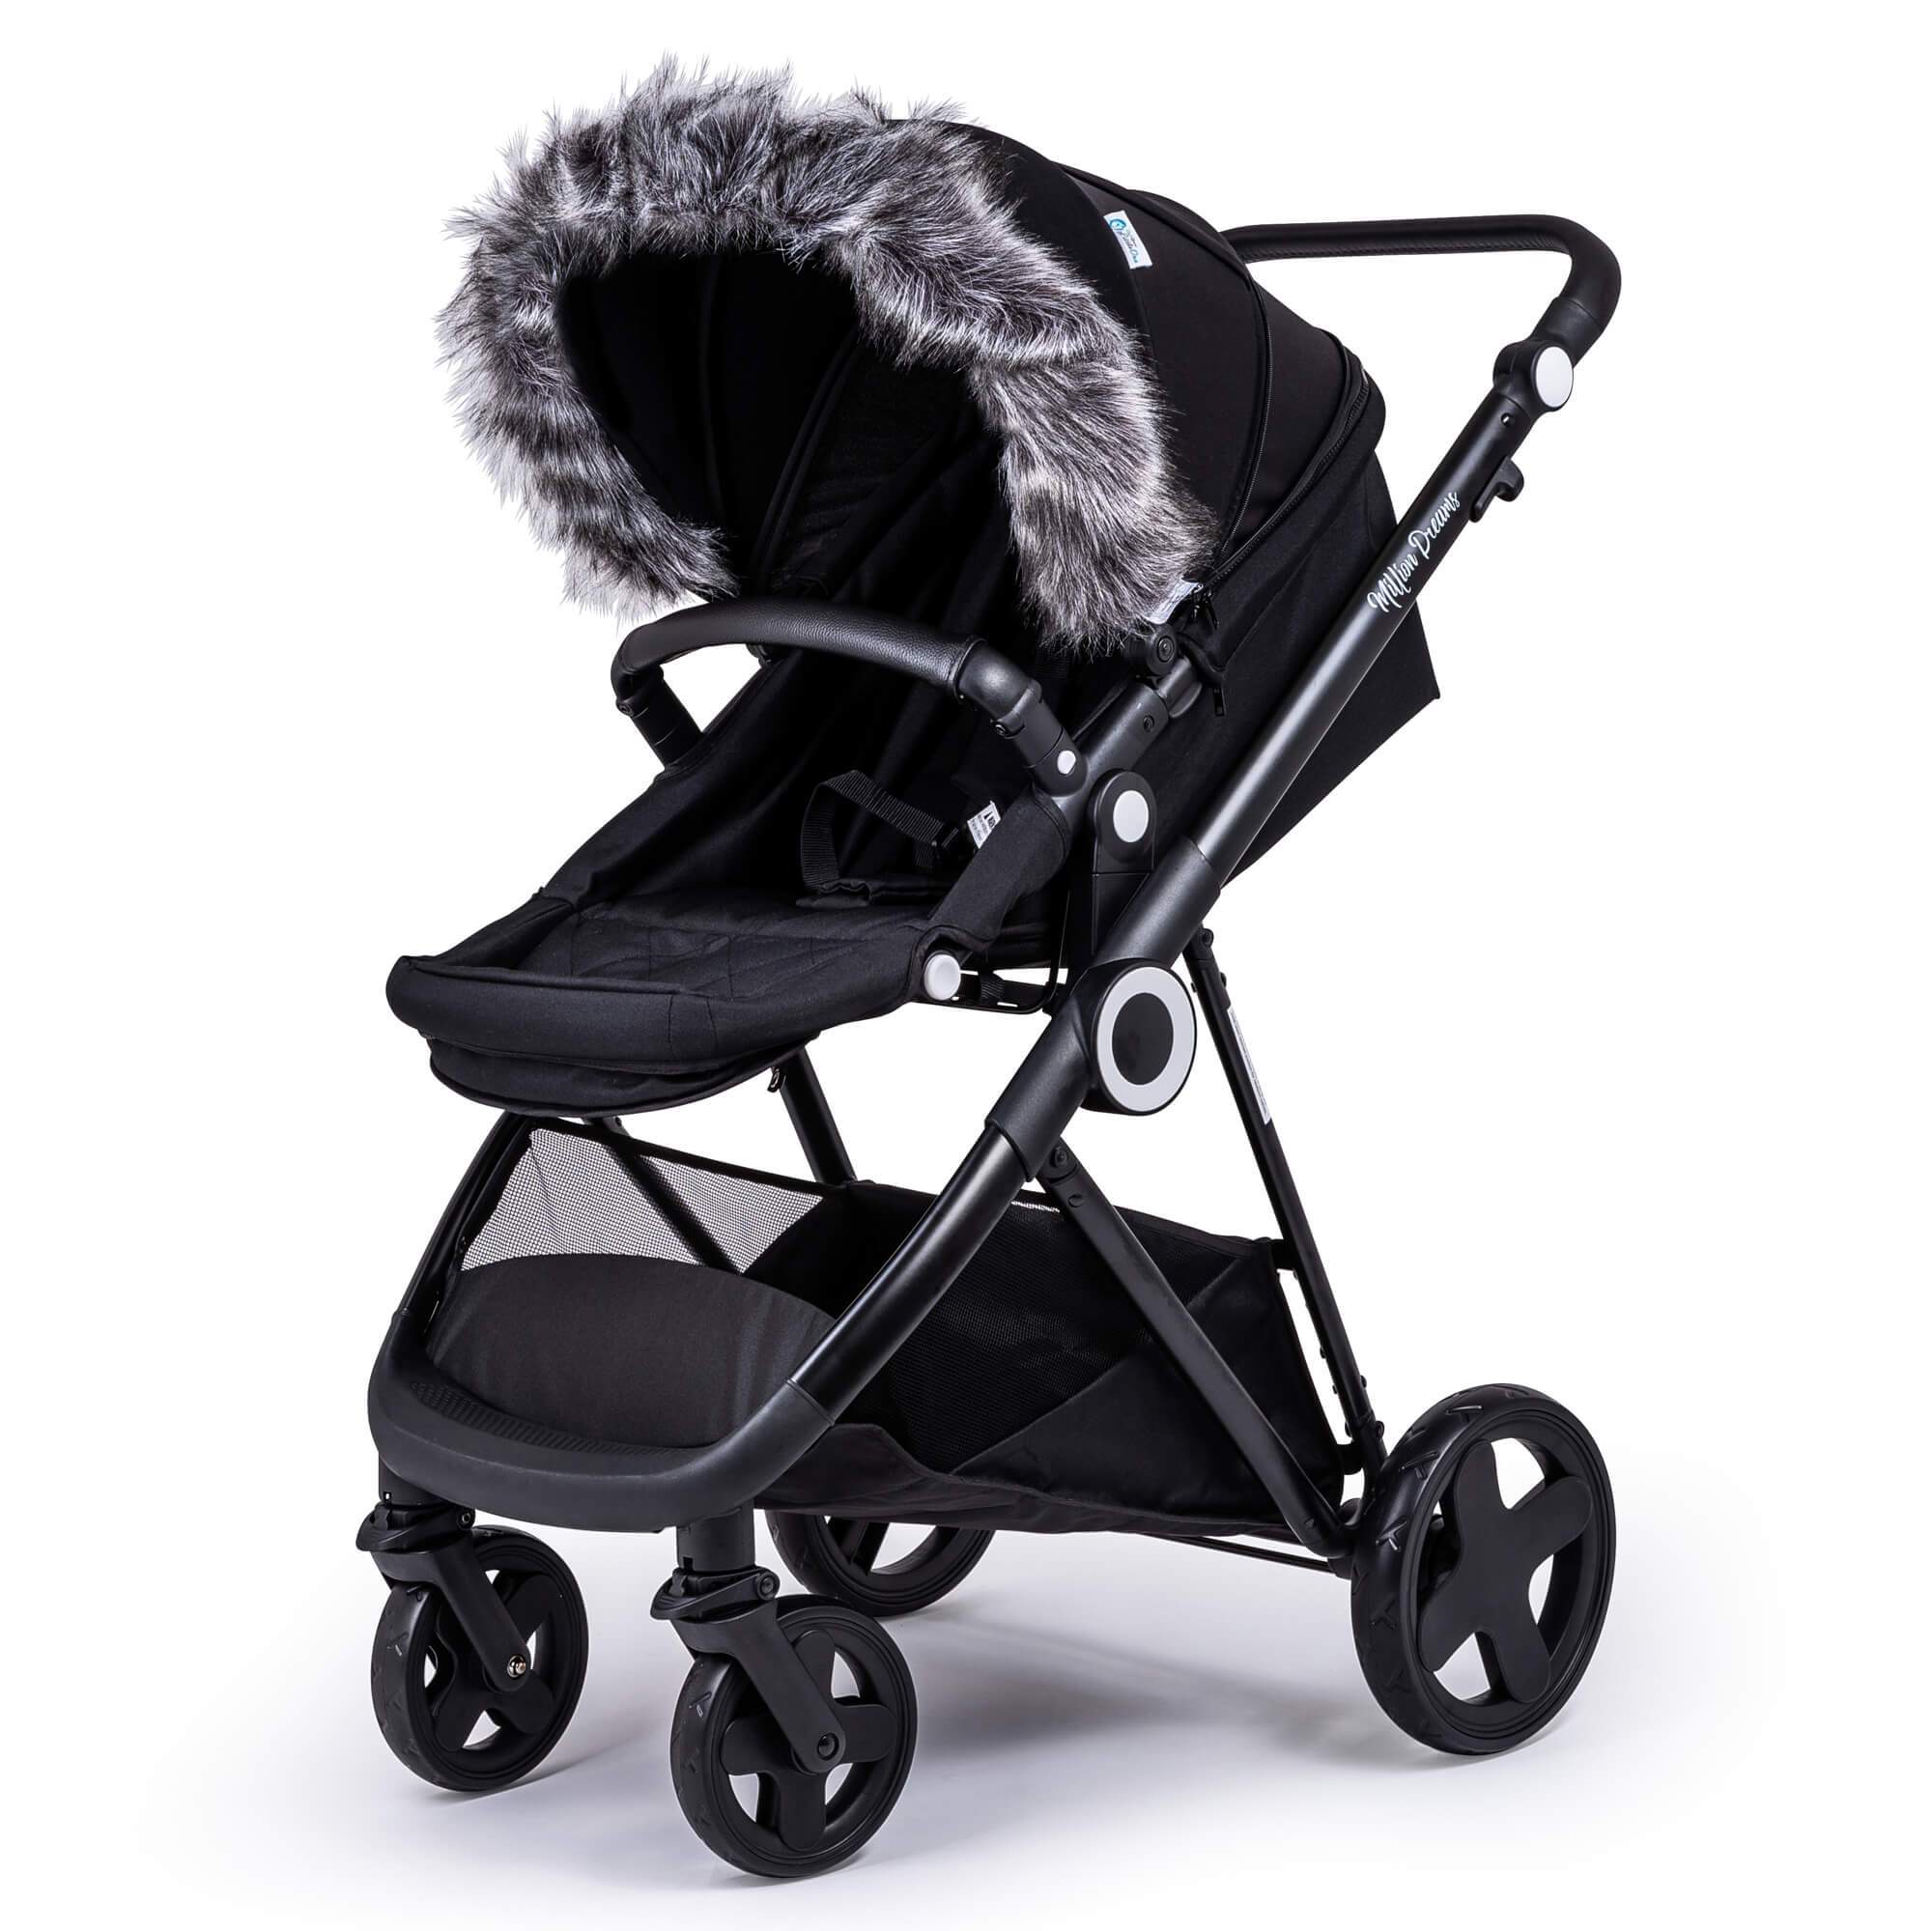 Pram Fur Hood Trim Attachment for Pushchair Compatible with TFK - Dark Grey / Fits All Models | For Your Little One